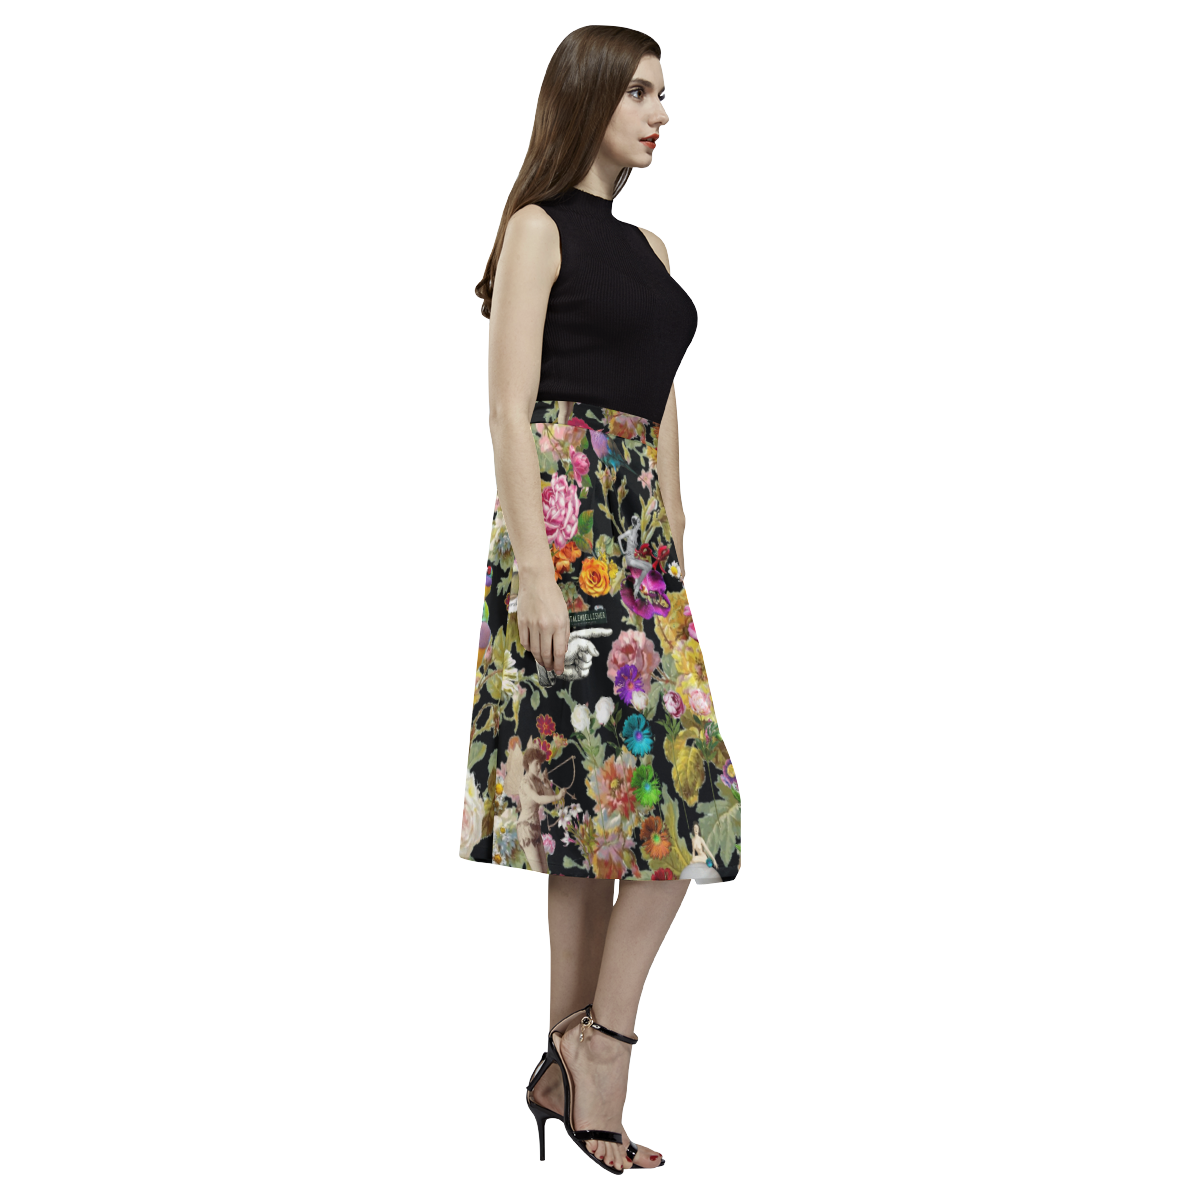 Let me Count the Ways 2 Aoede Crepe Skirt (Model D16)